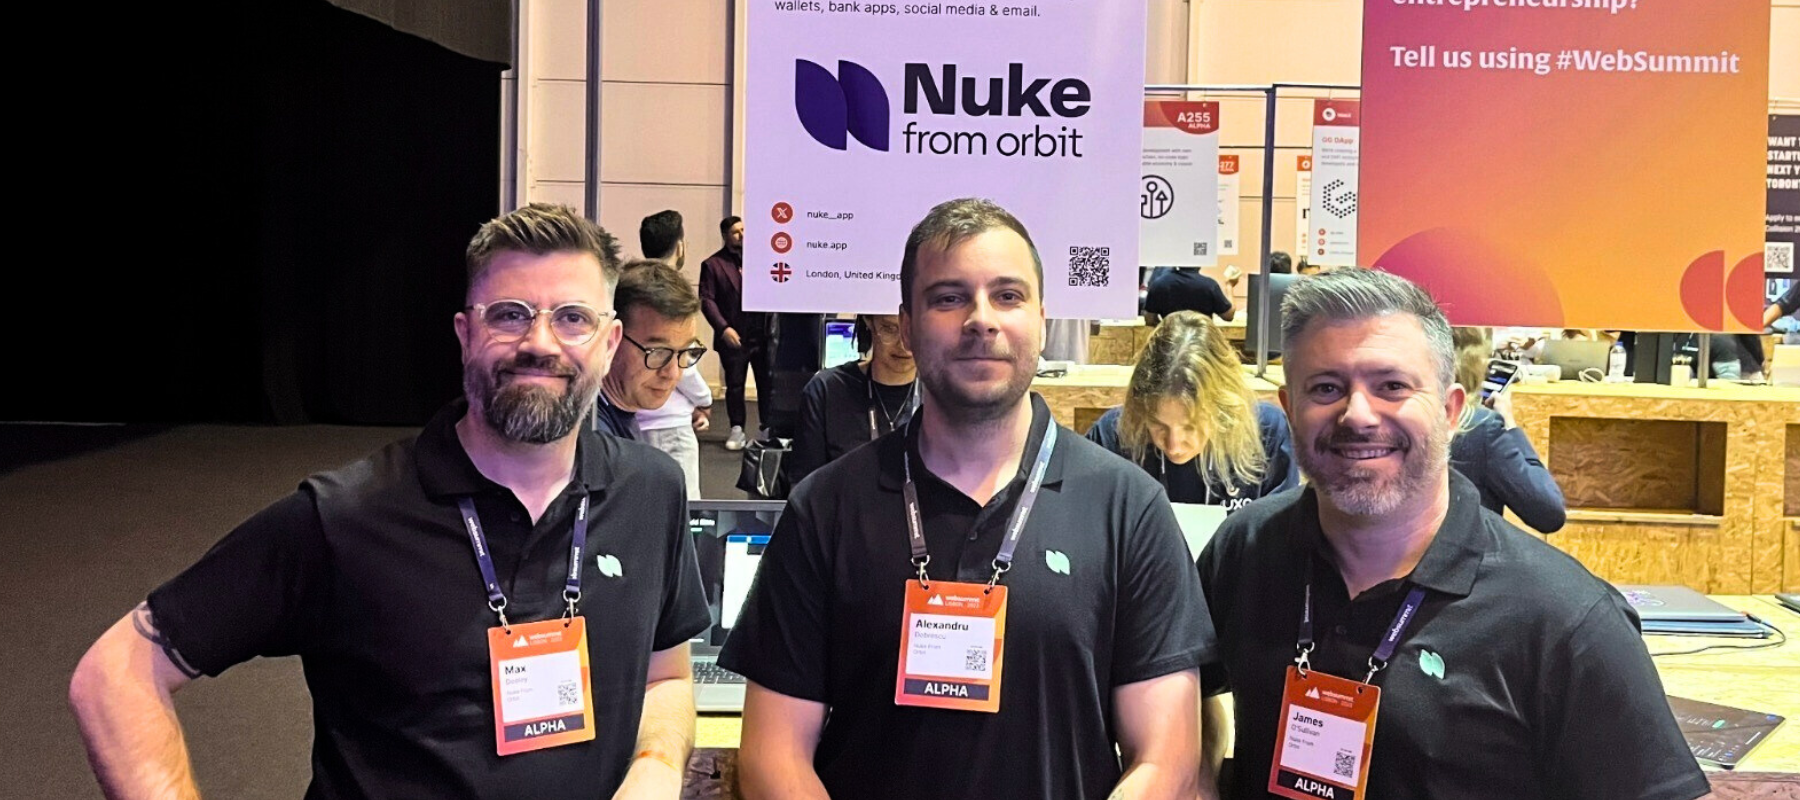 UK-based fintech startup Nuke From Orbit raises £500K pre-seed funding to deliver smarter smartphone security